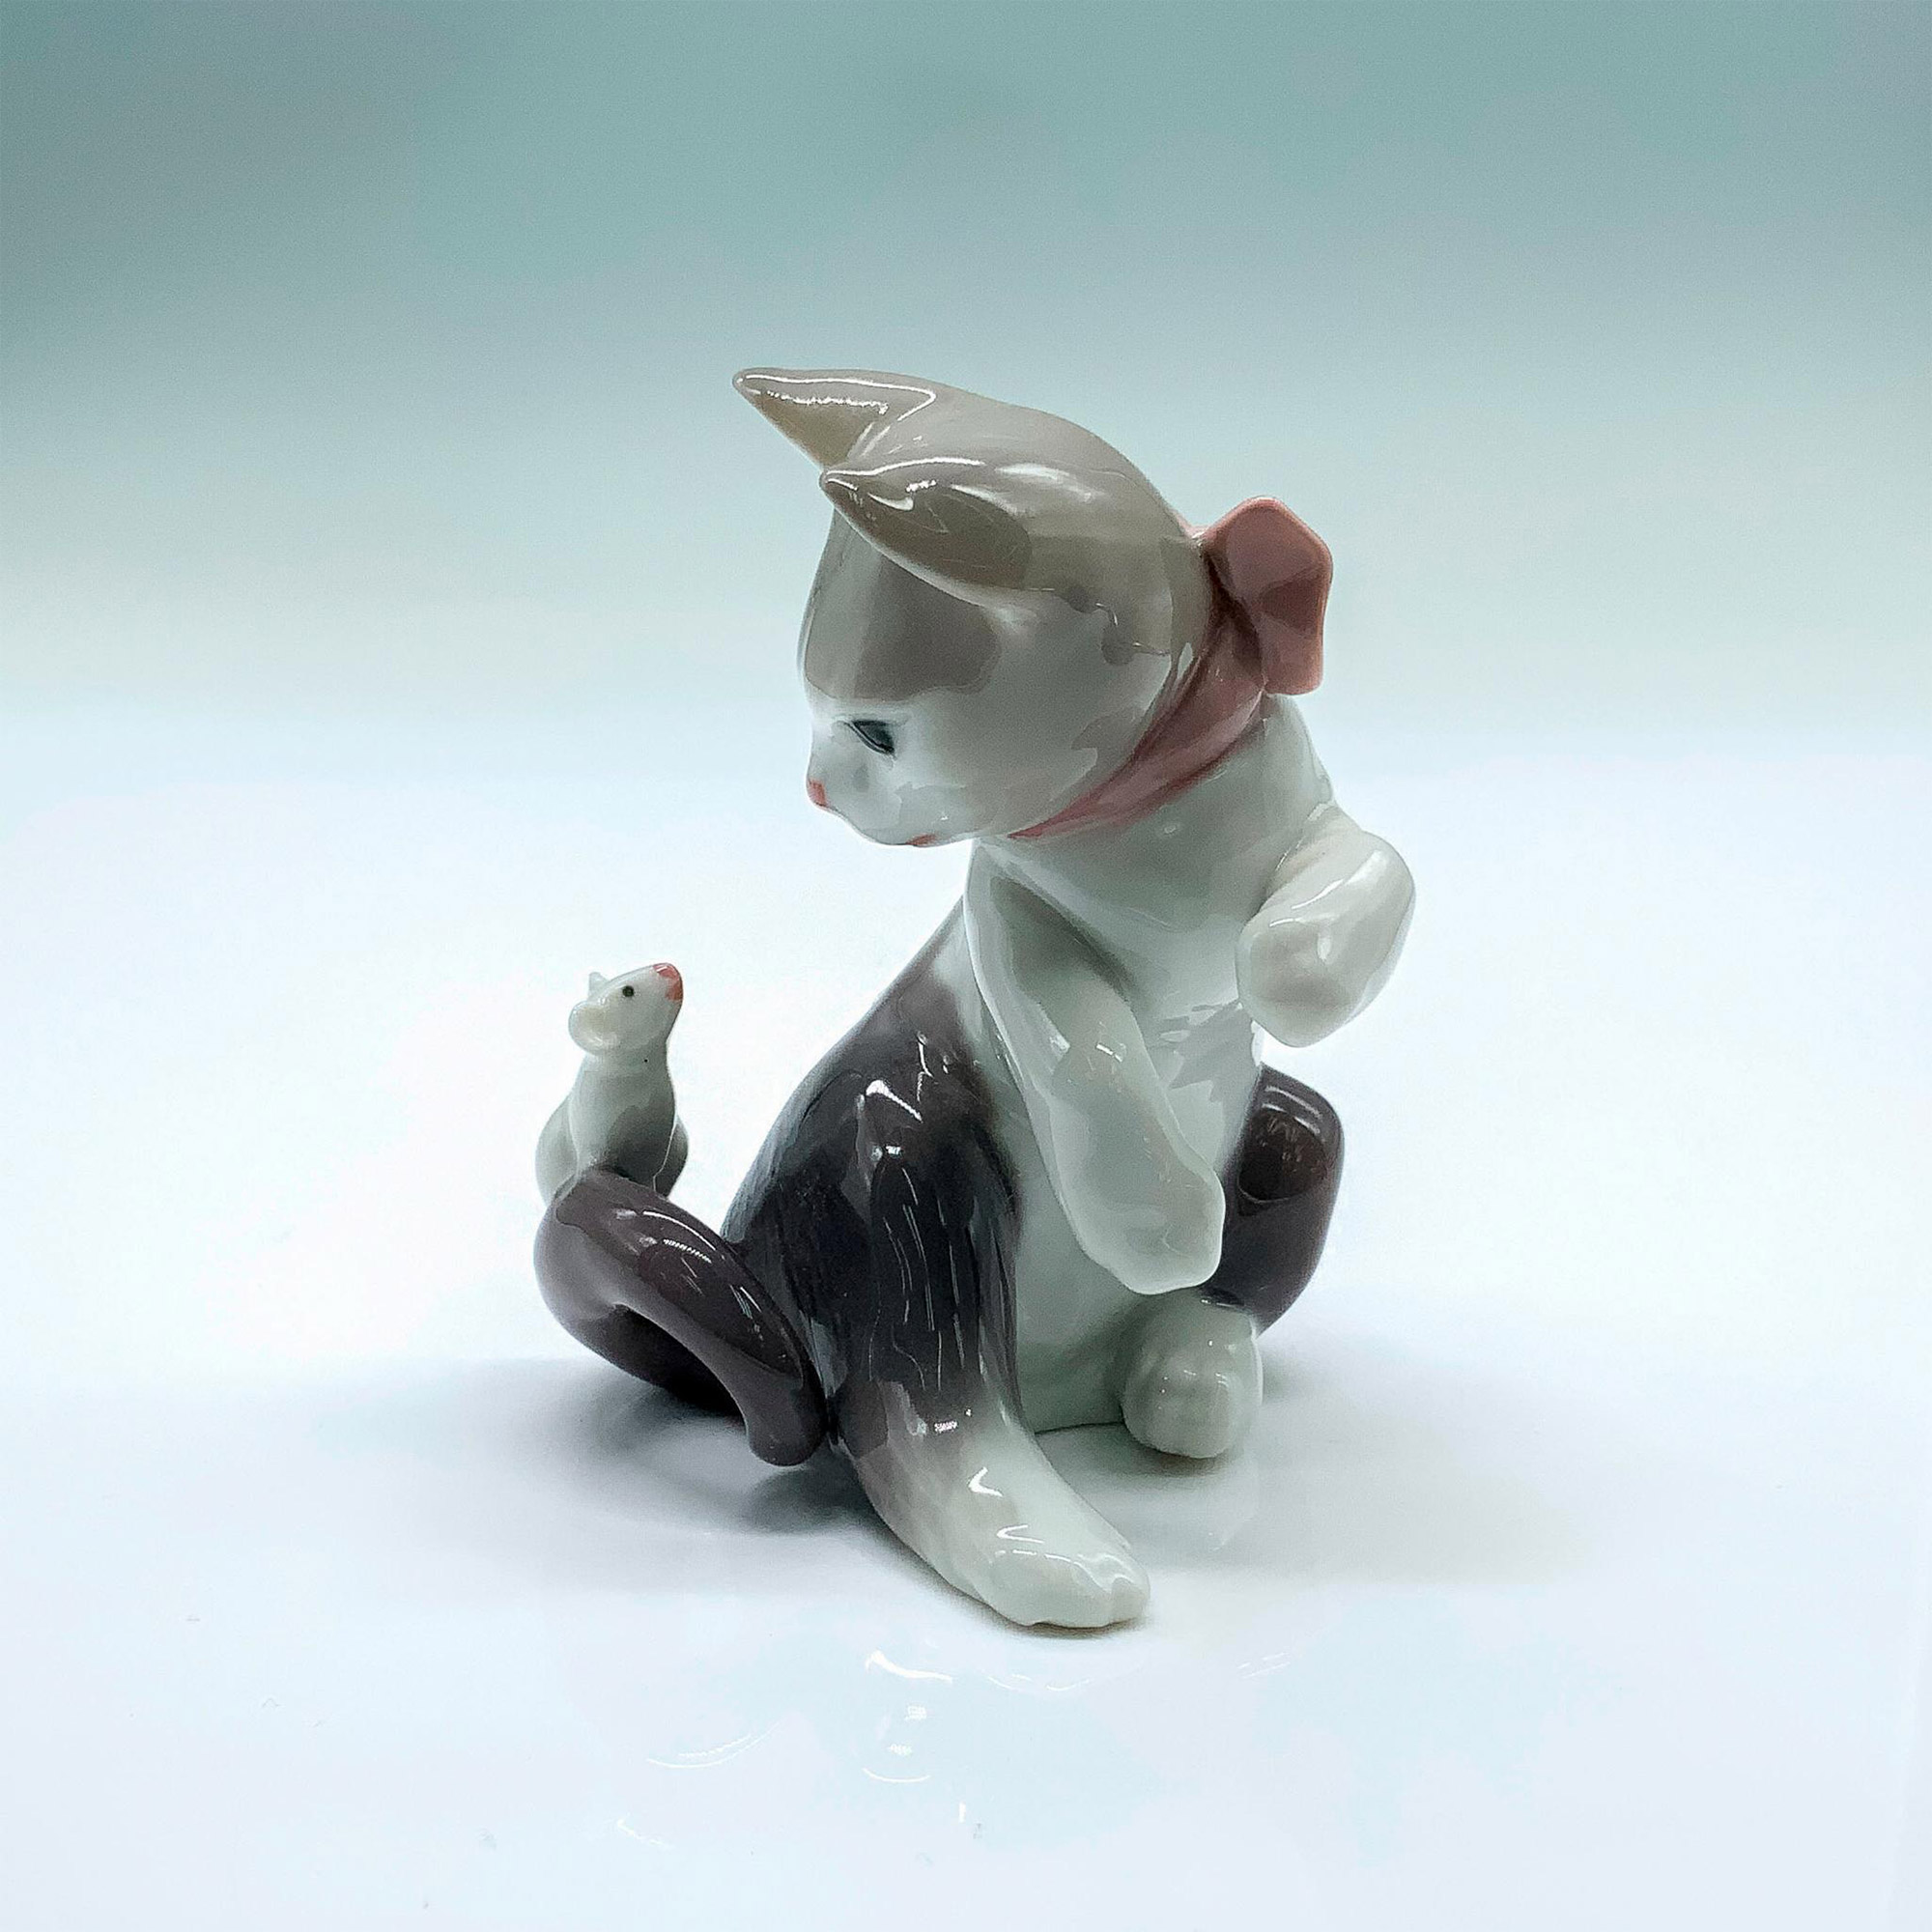 Cat and Mouse 1005236 - Lladro Porcelain Figurine - Image 2 of 4